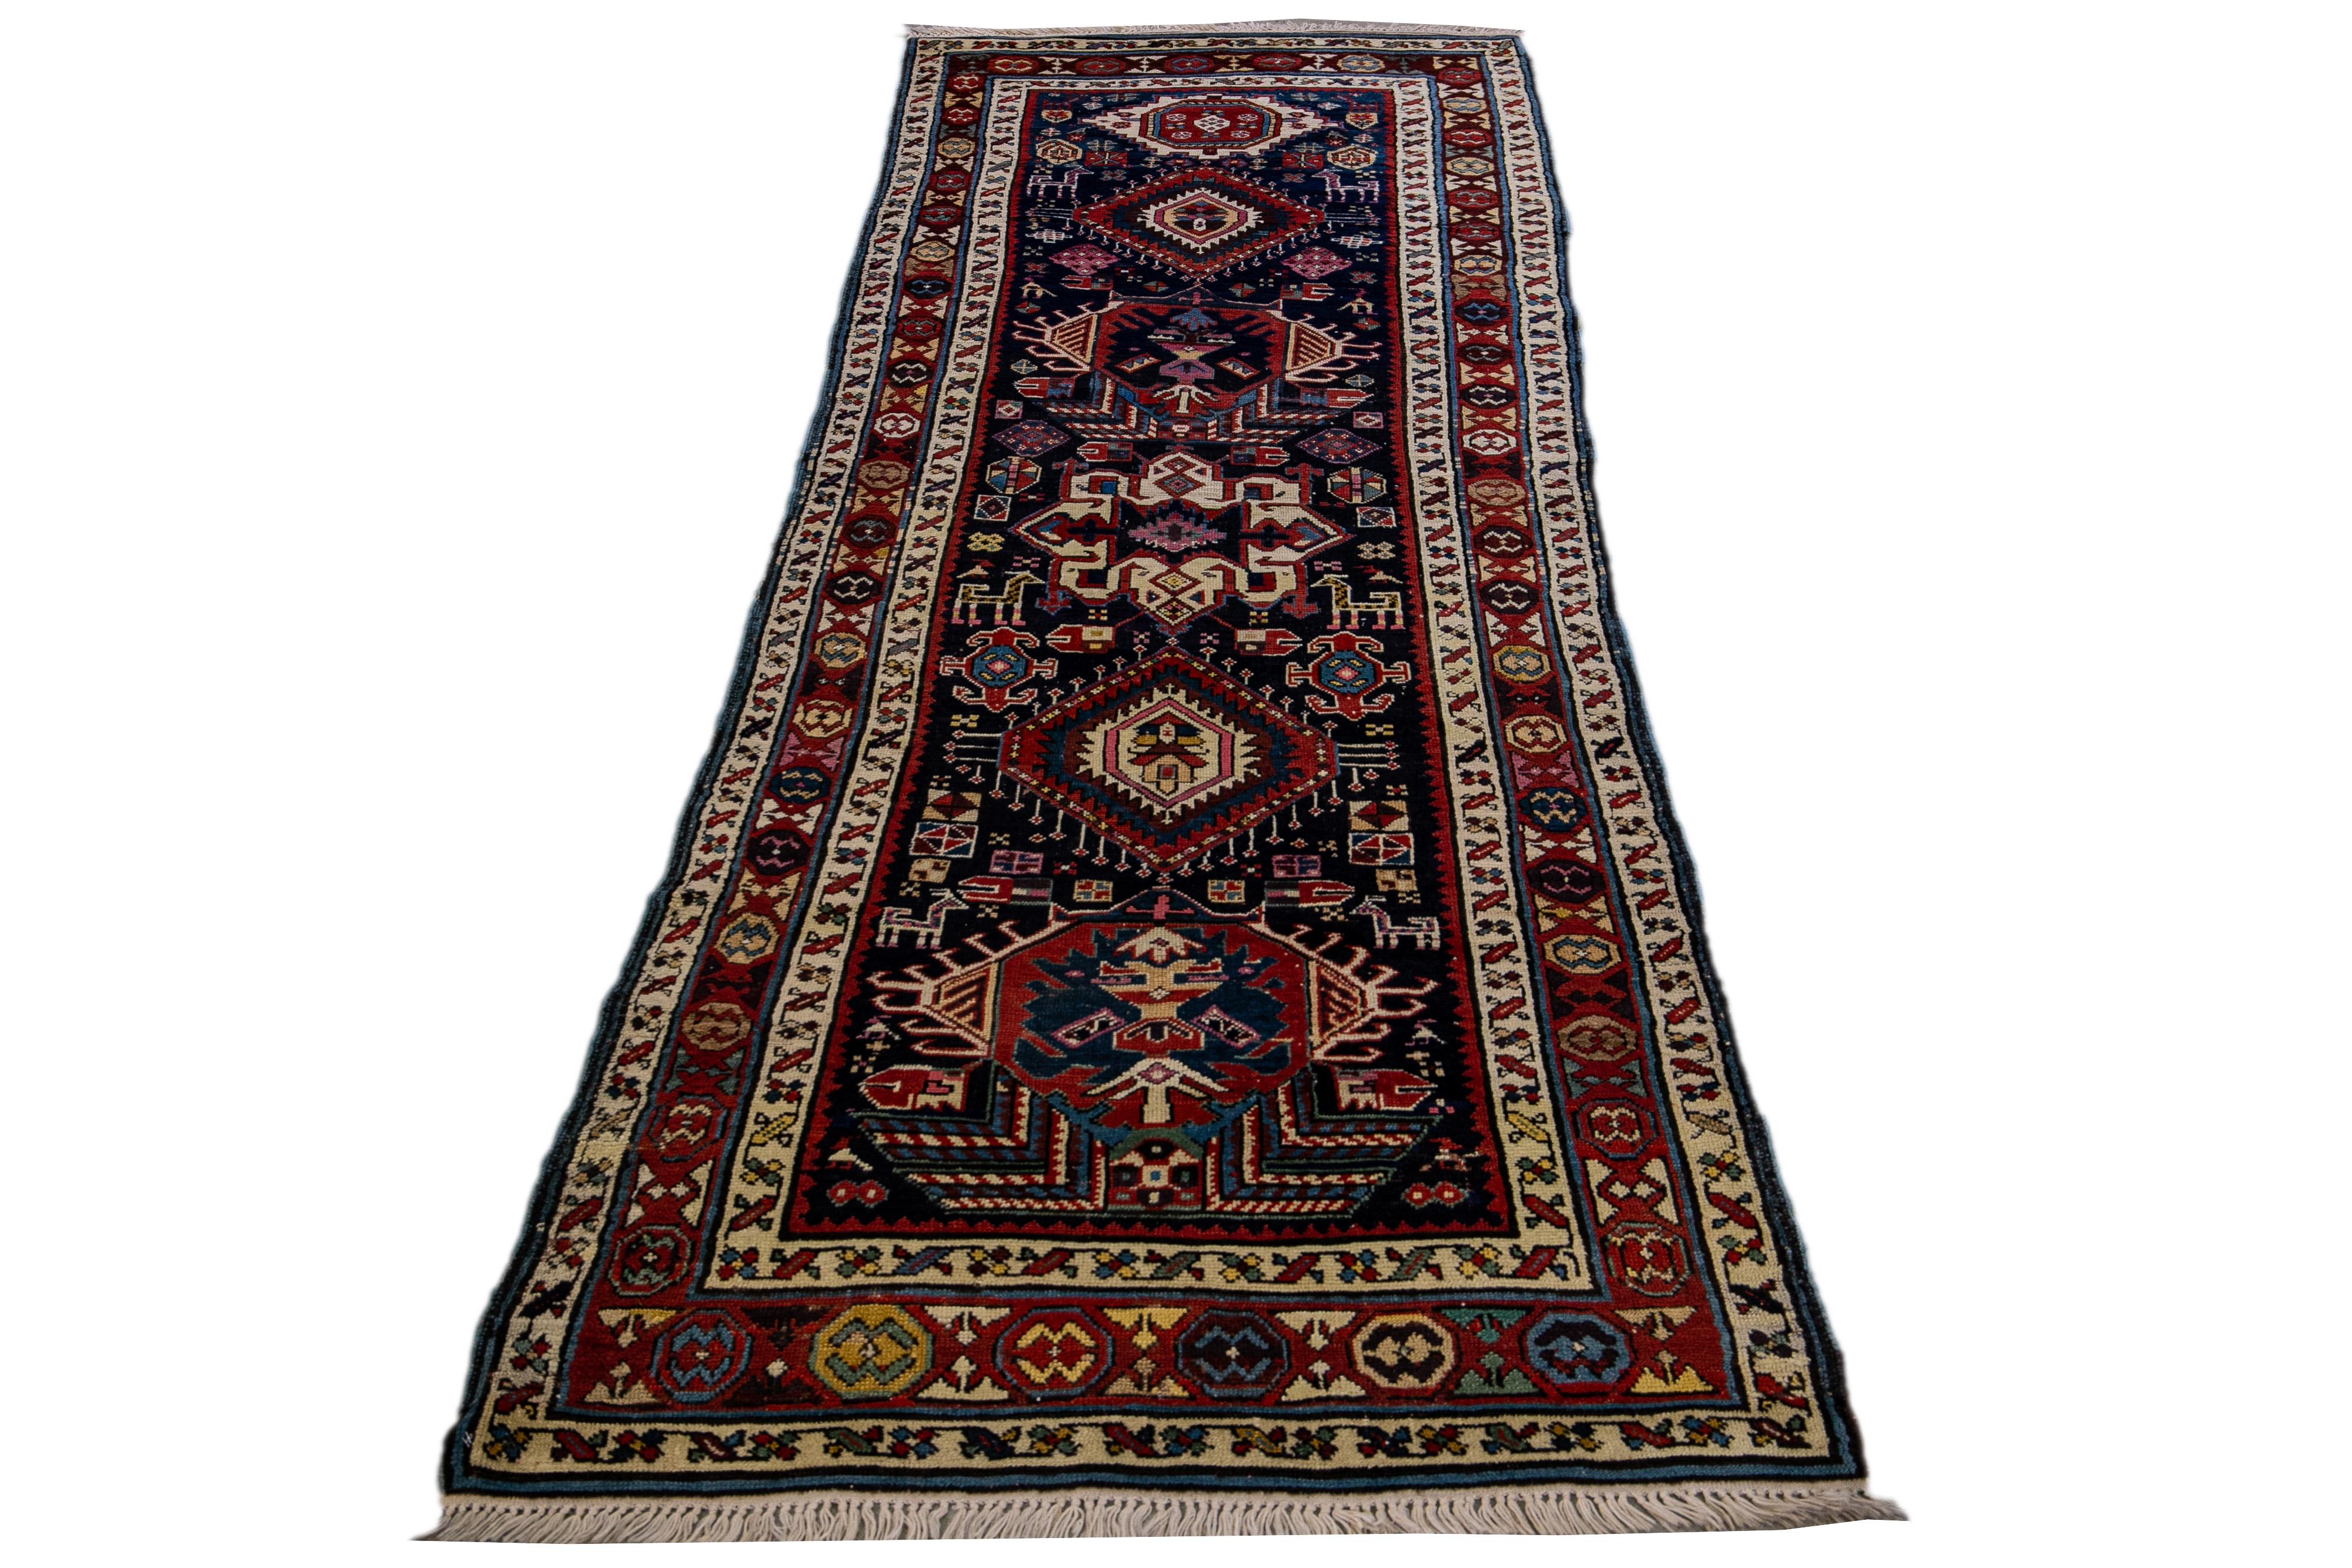 An Antique North West Persian runner rug featuring a tribal motif in navy blue. This piece exhibits exquisite details, vibrant colors, and a stunning design.

This rug measures 3'4